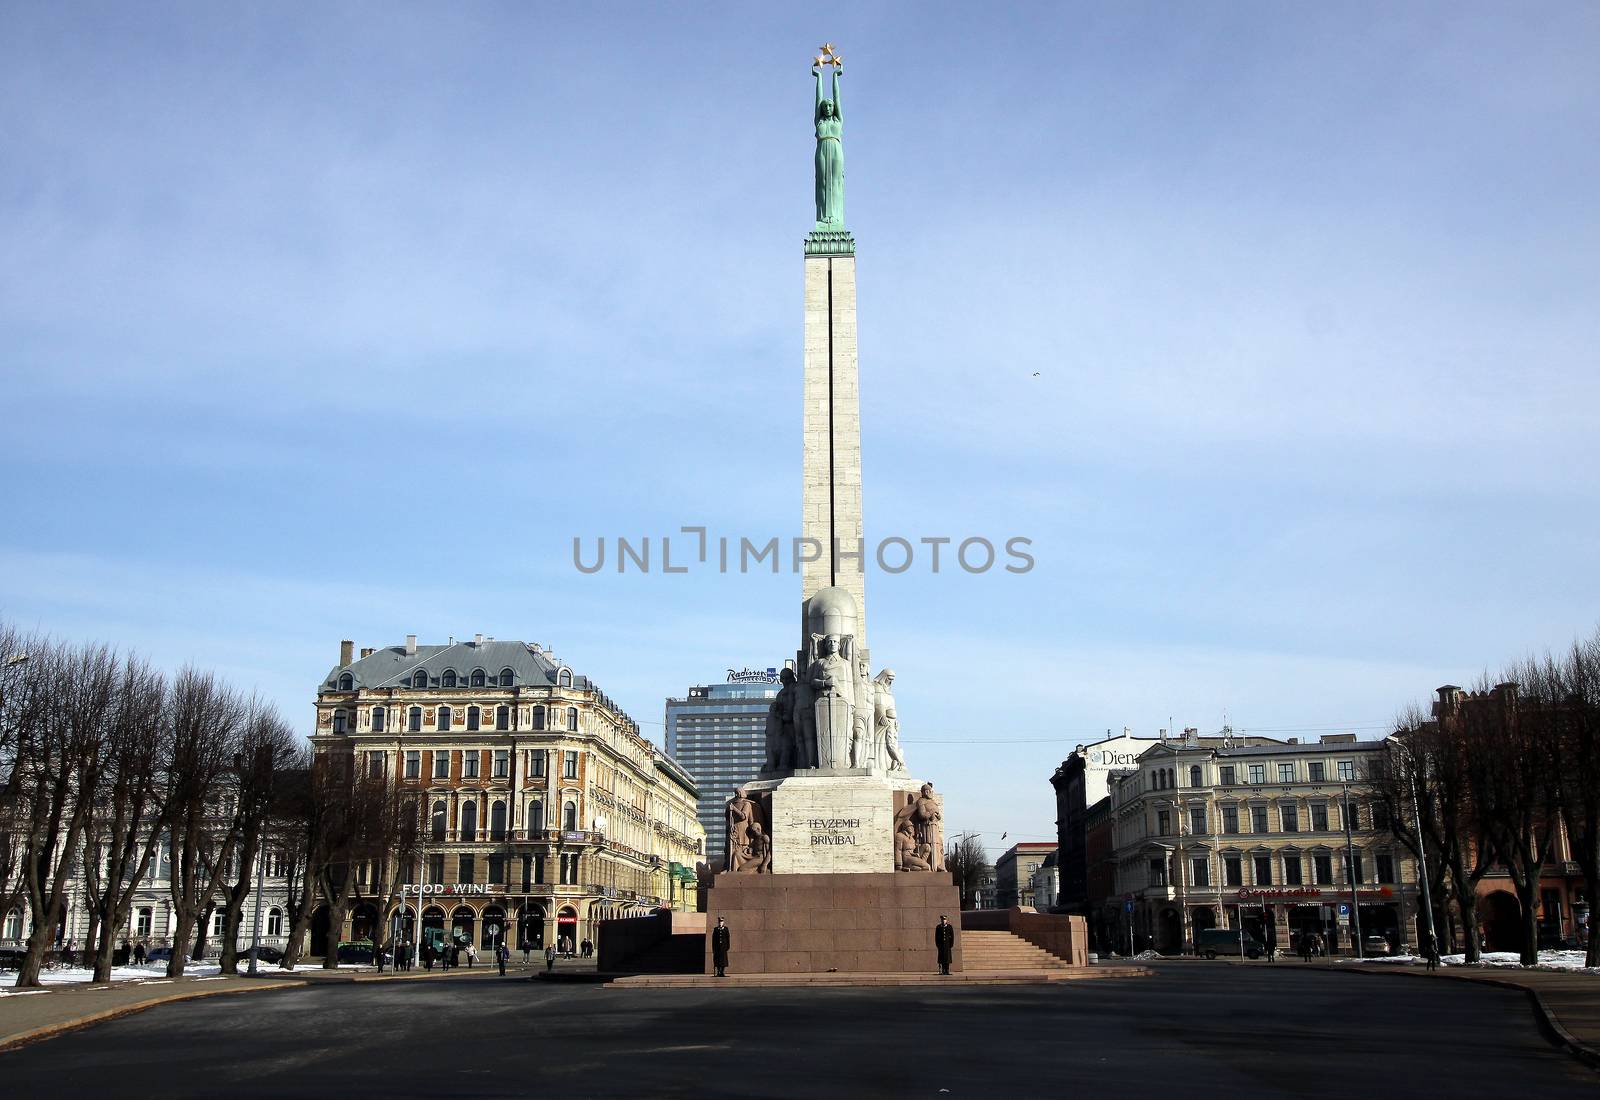 The Freedom Monument by Maris